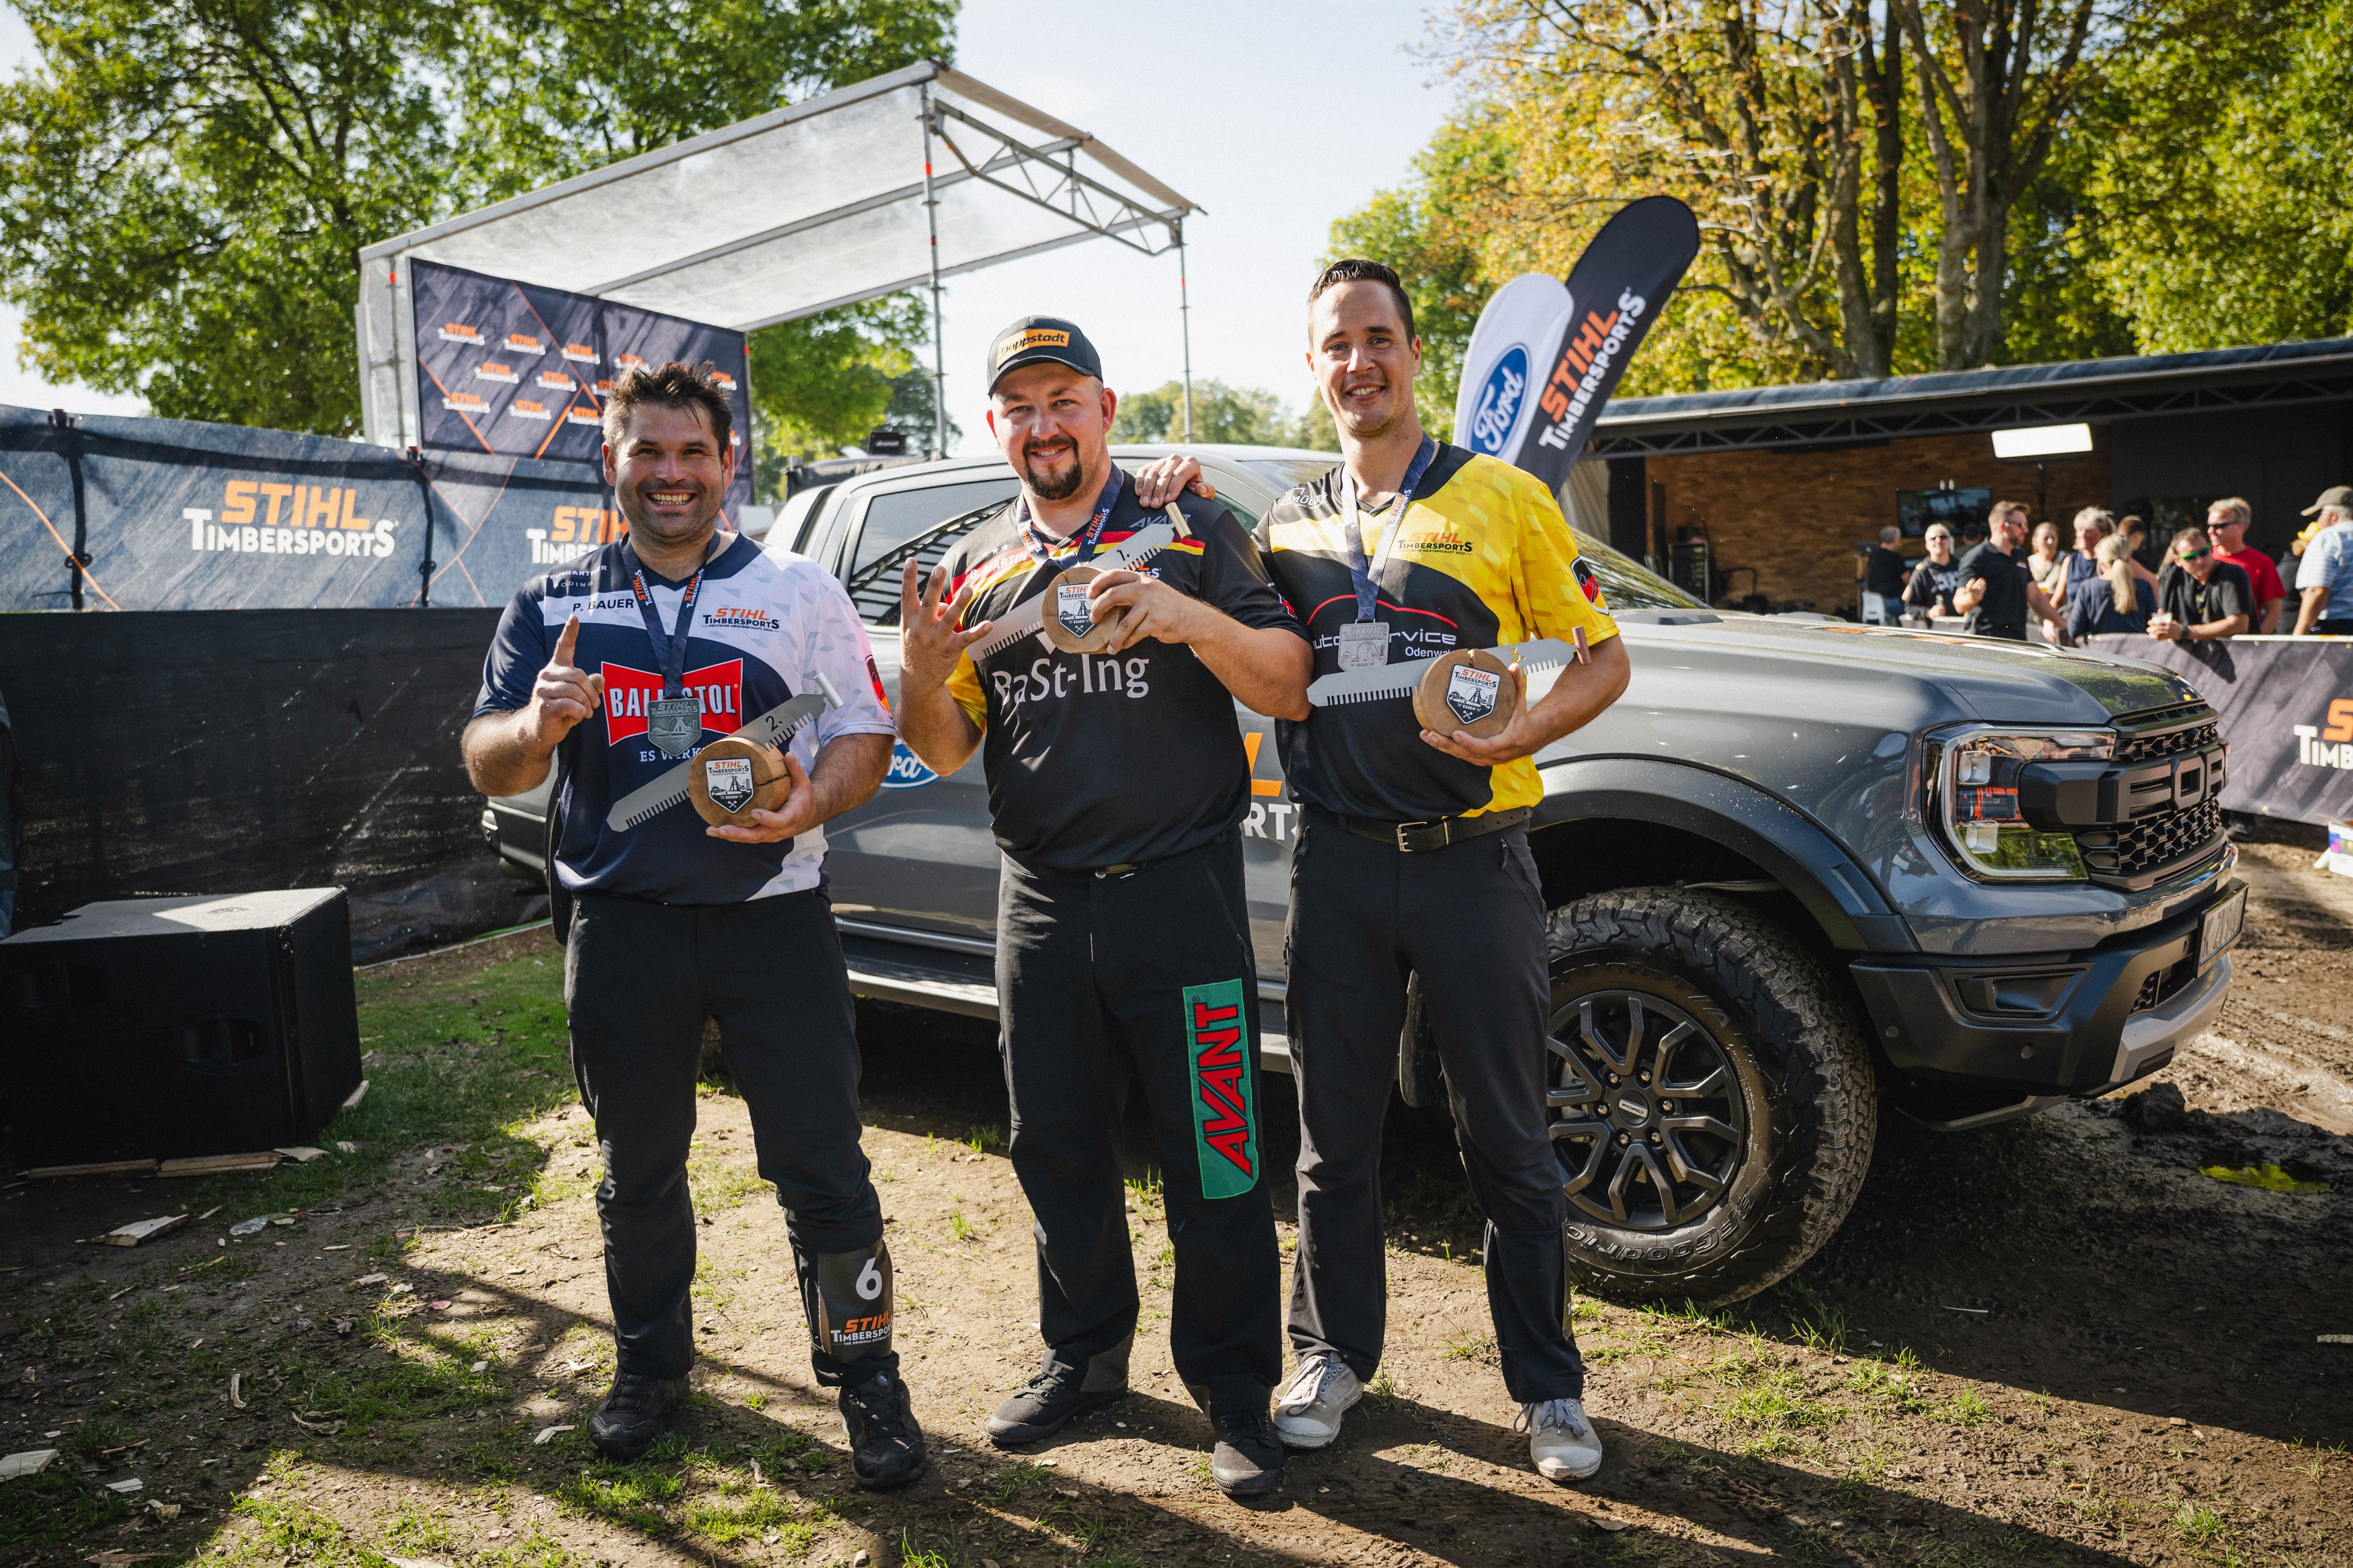 Danny Martin (centre) triumphs at the 2023 German Championship ahead of Peter Bauer (l.) and Stephan Odwarka (r.).